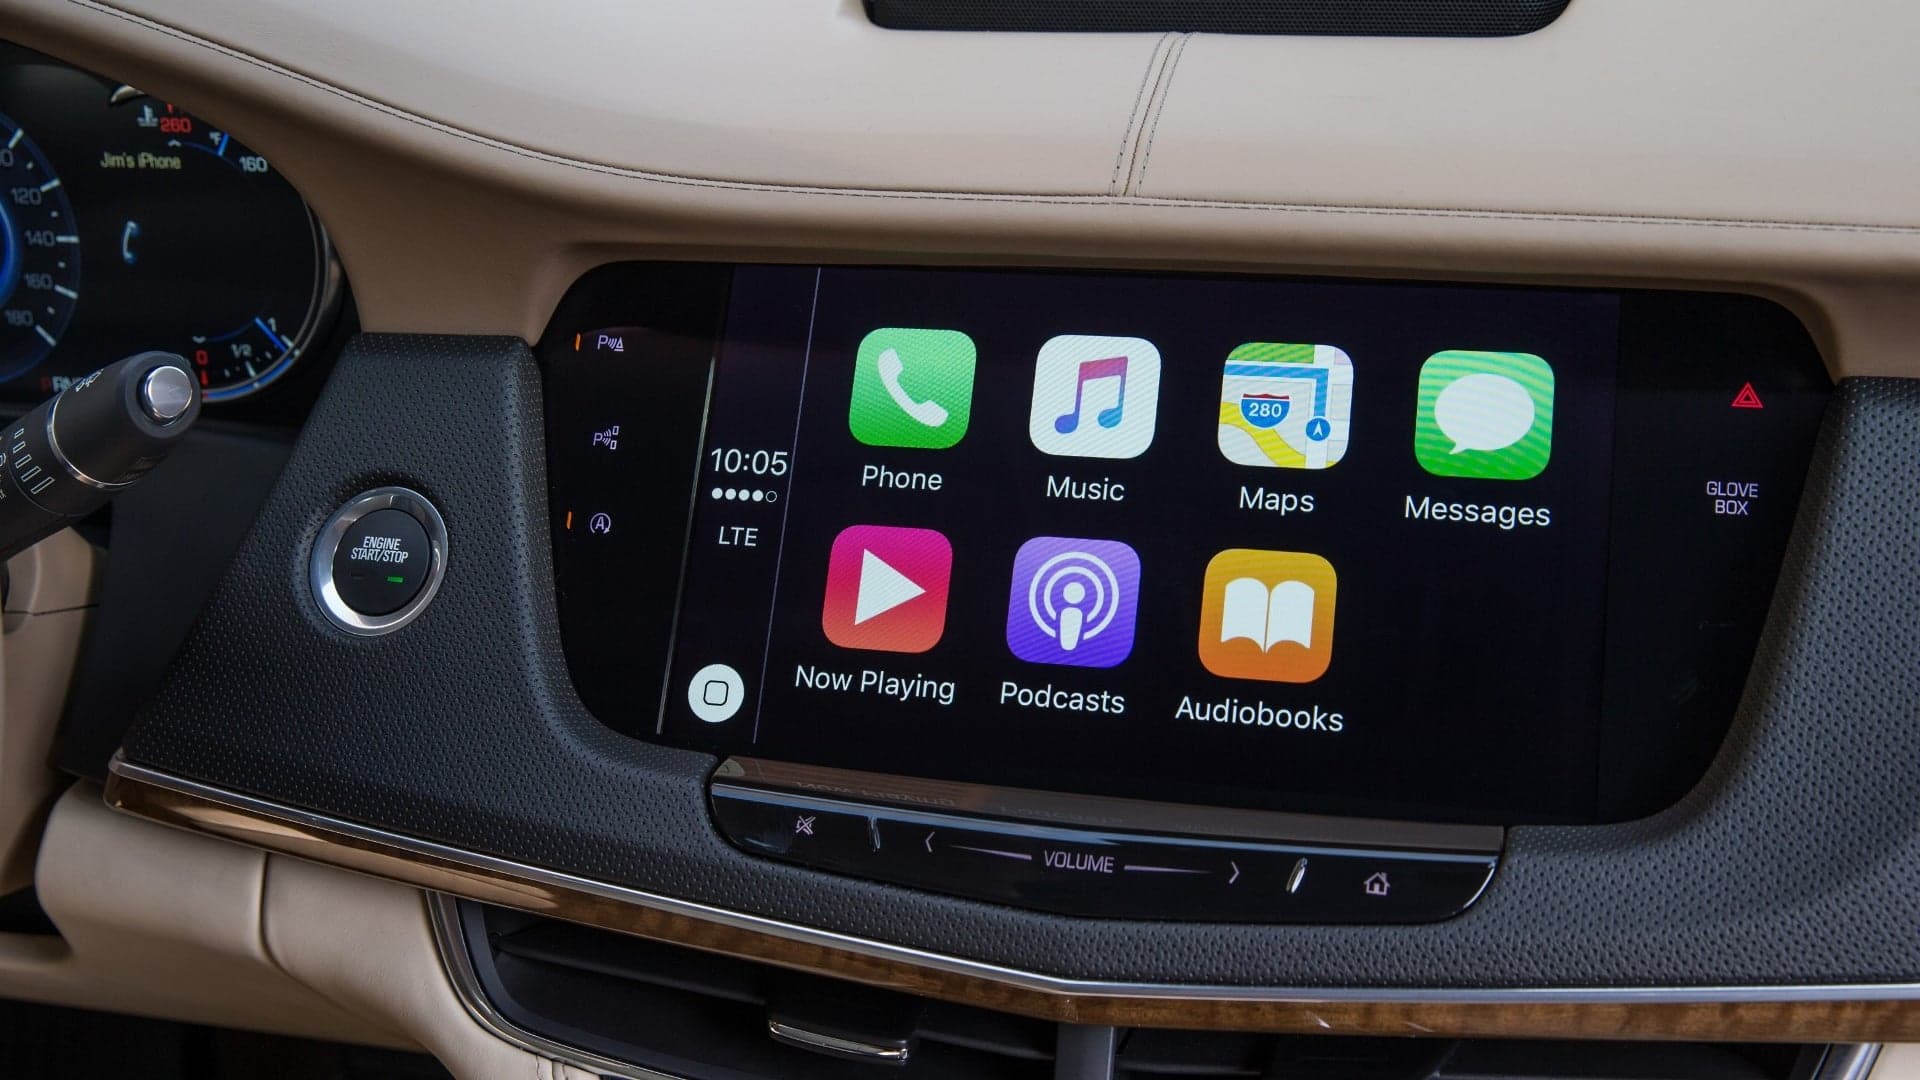 Automotive Infotainment Systems Aren’t Going Anywhere, Report Says